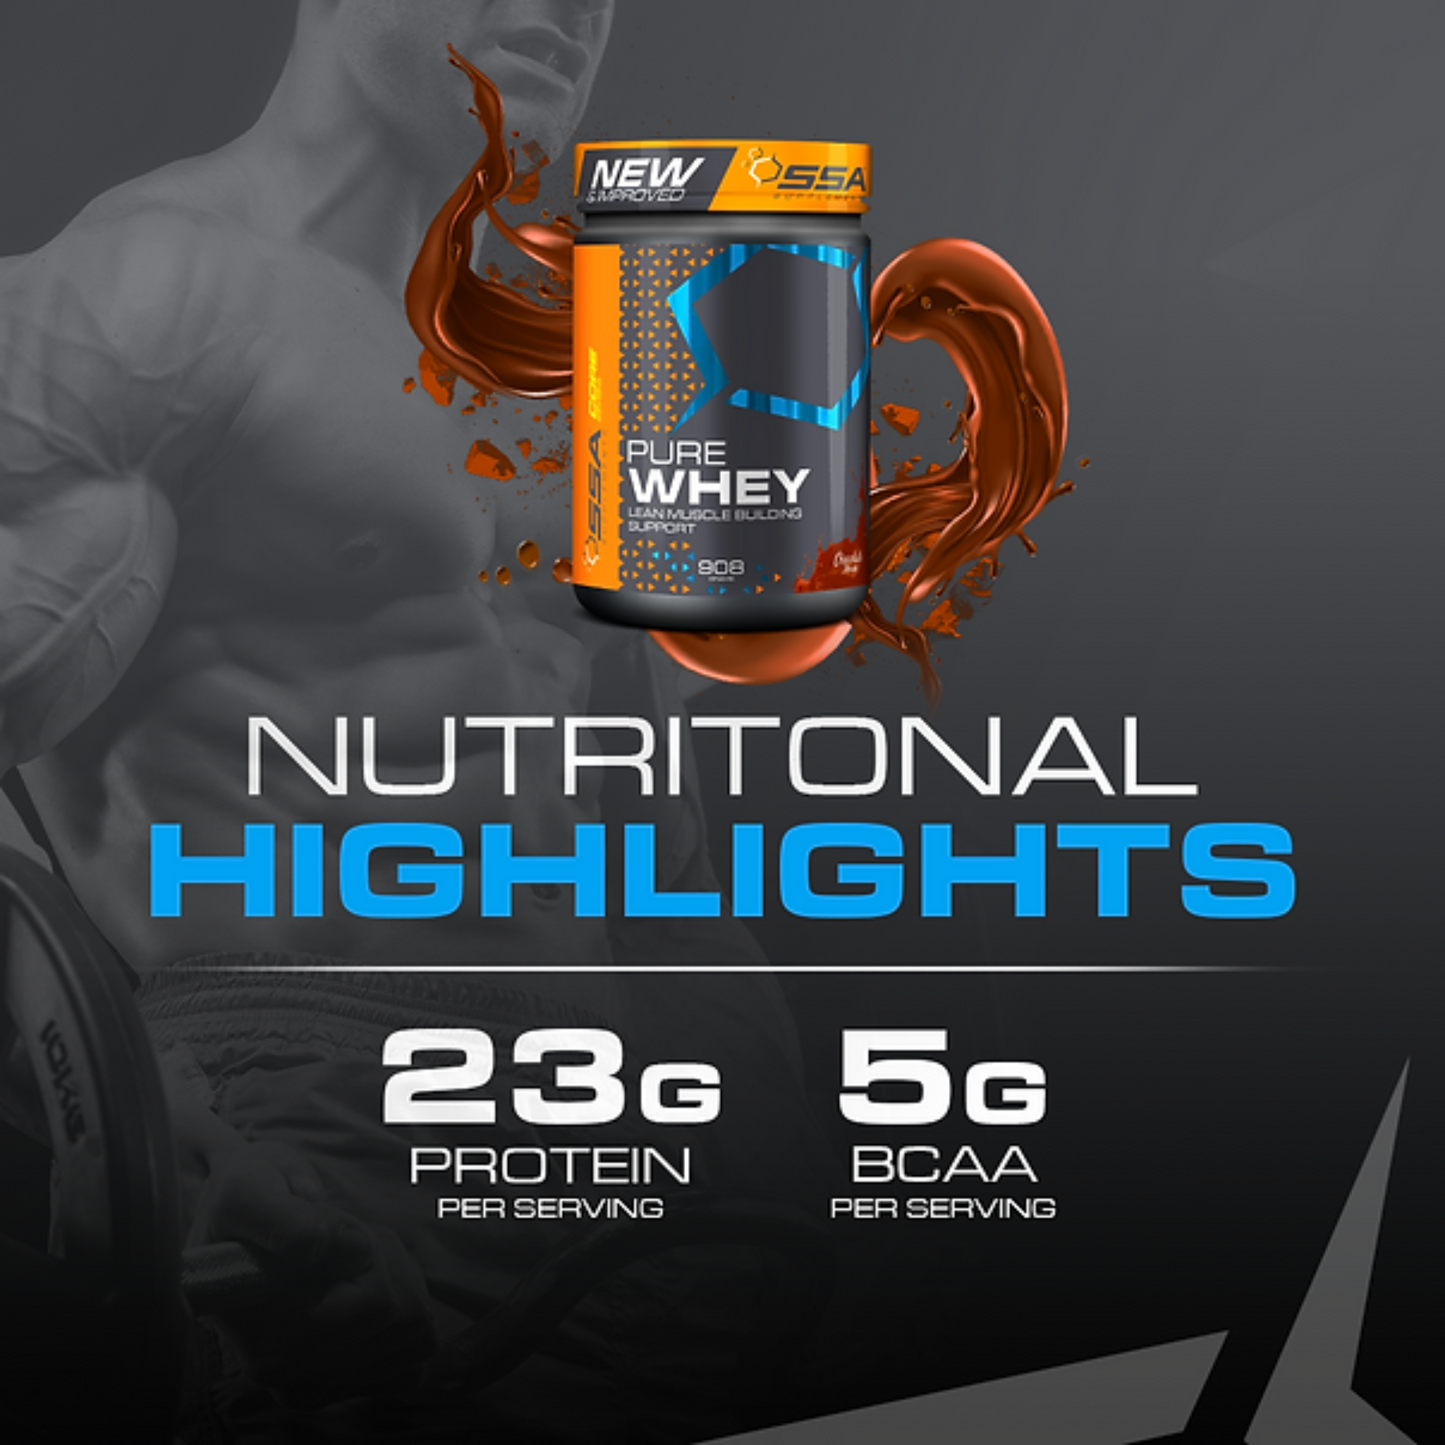 SSA SUPPLEMENTS Pure Whey Protein 908g